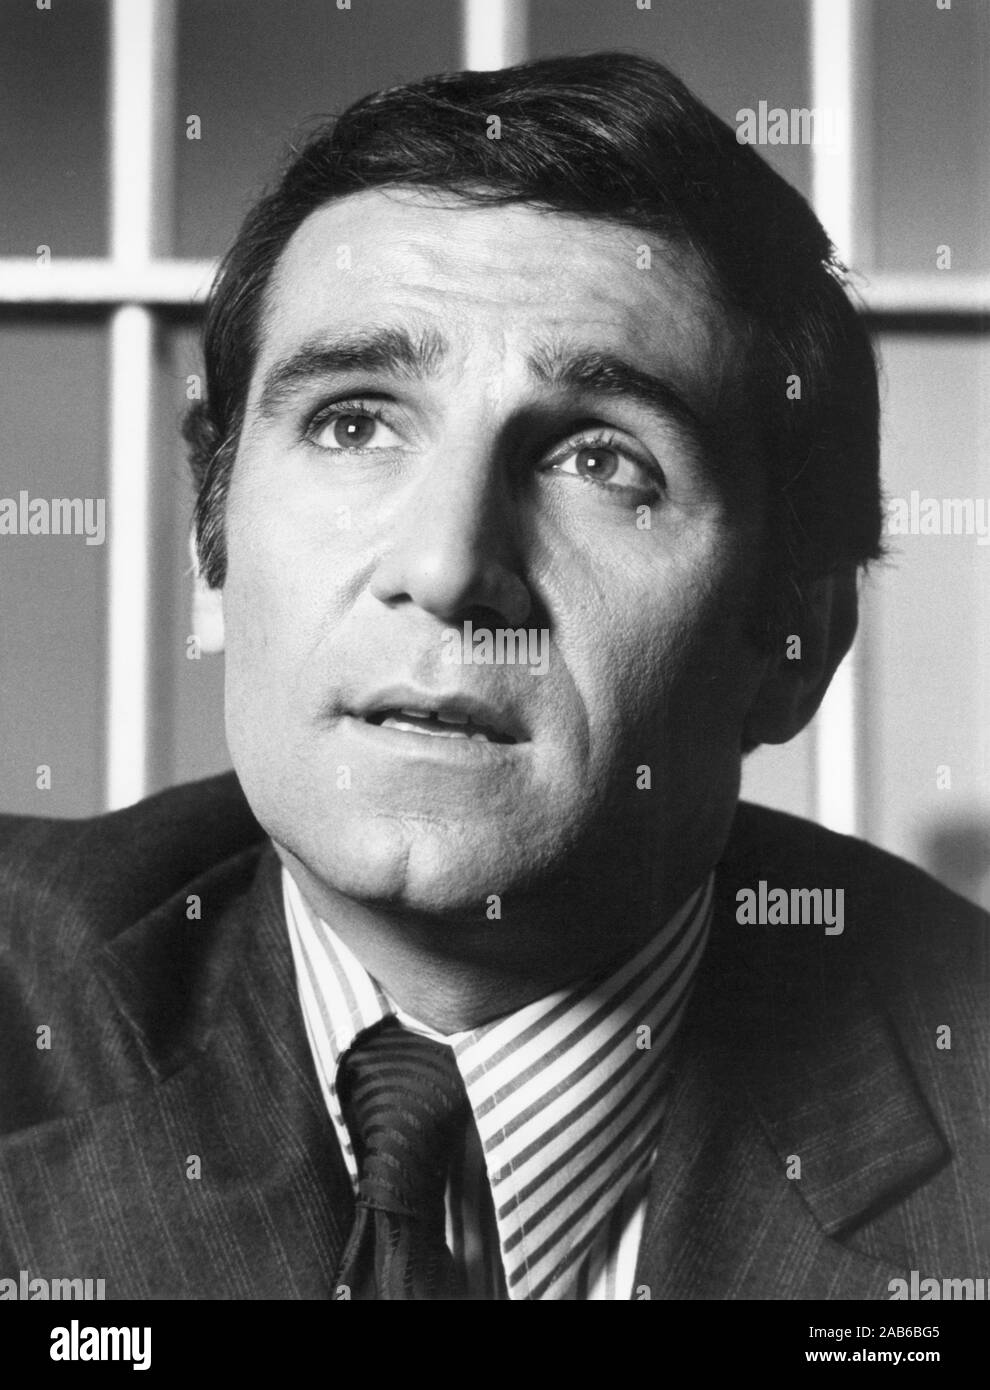 Tony Lo Bianco, Publicity Portrait for the TV Series, "Police Story", NBC-TV, 1975 Stock Photo